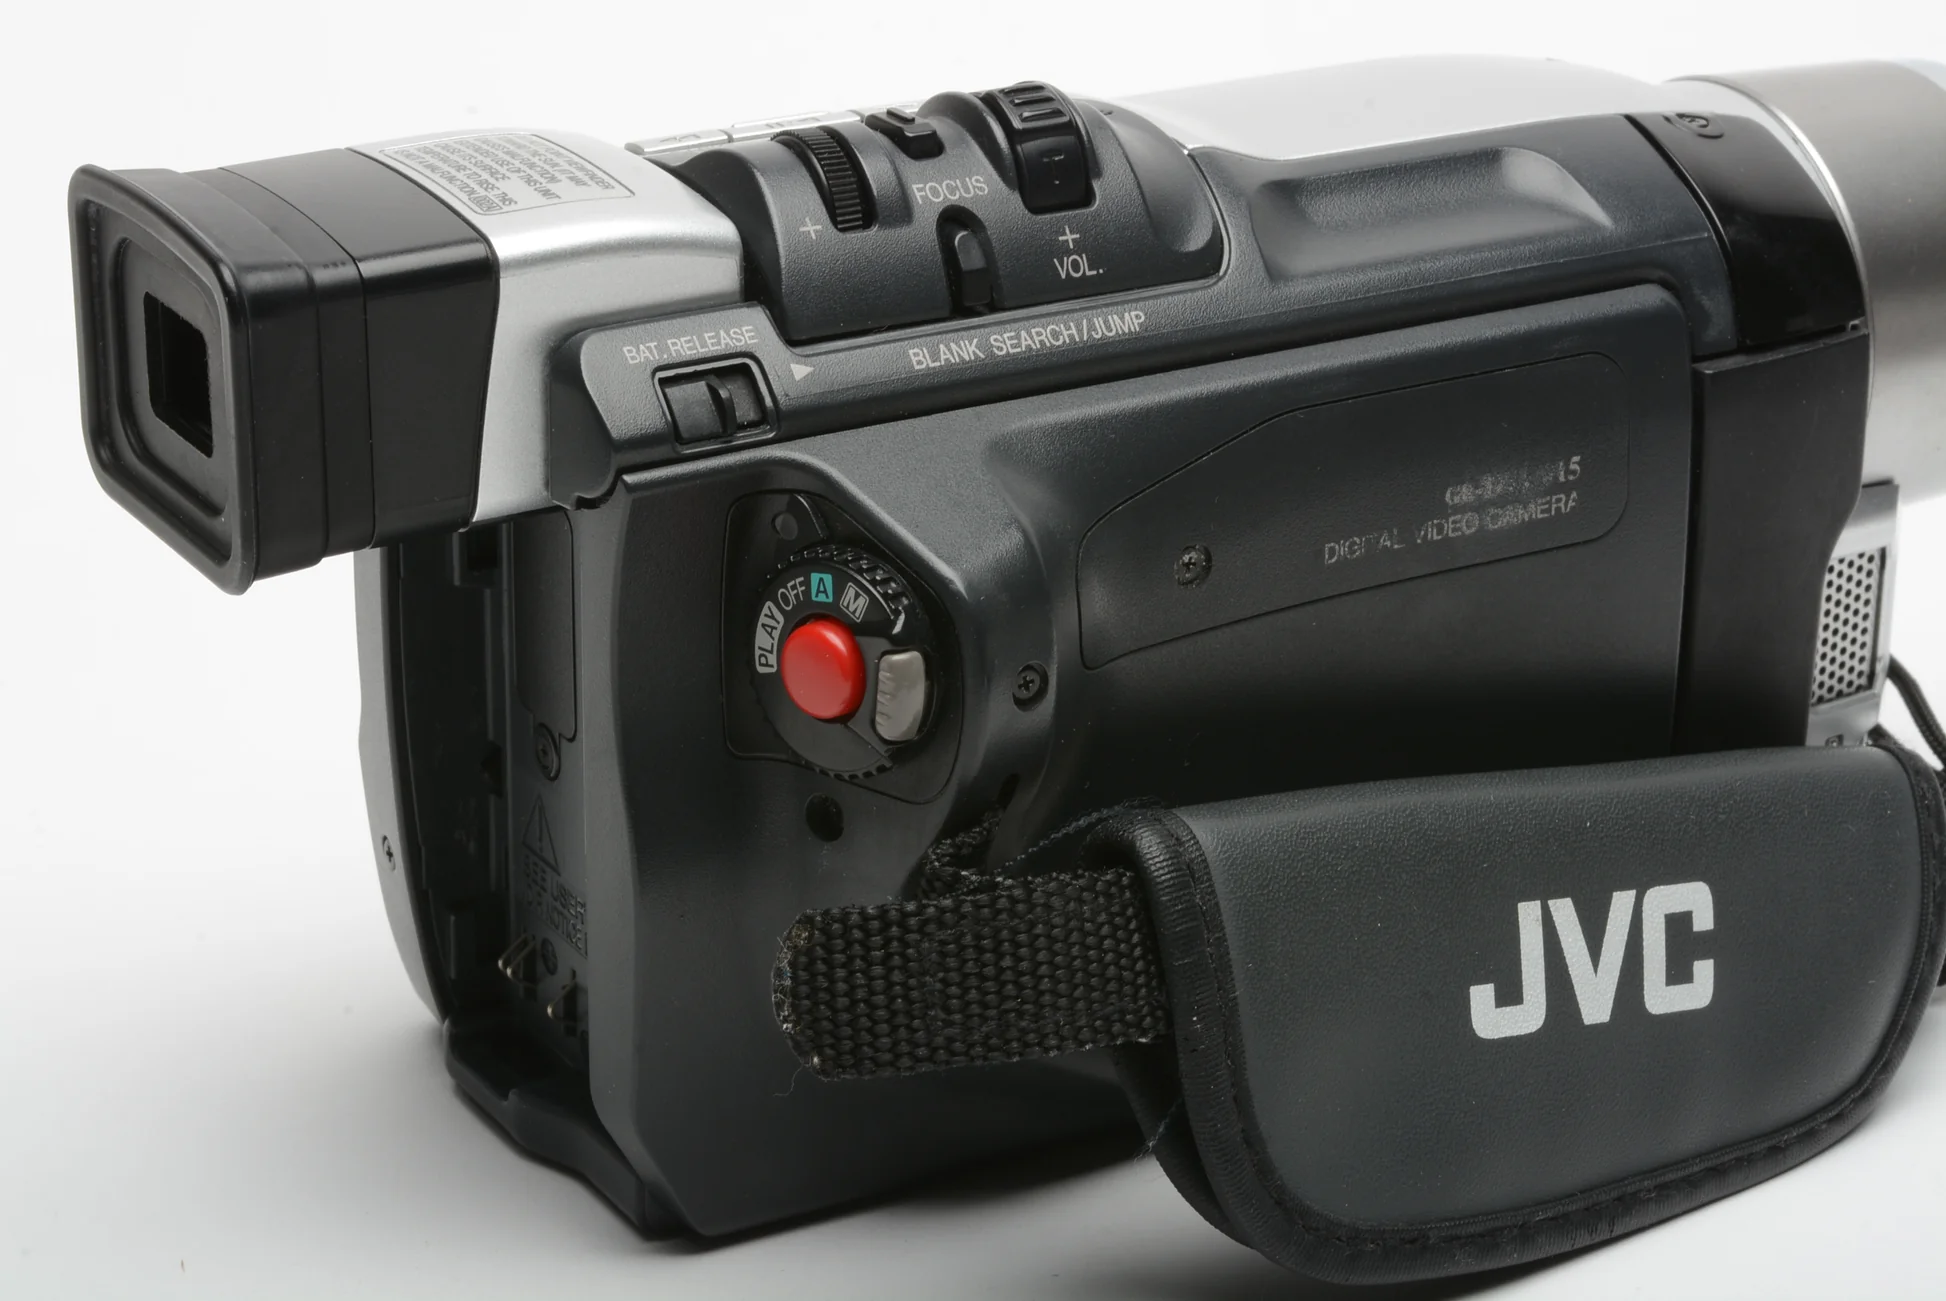 How To Pair JVC Remote To Camcorder